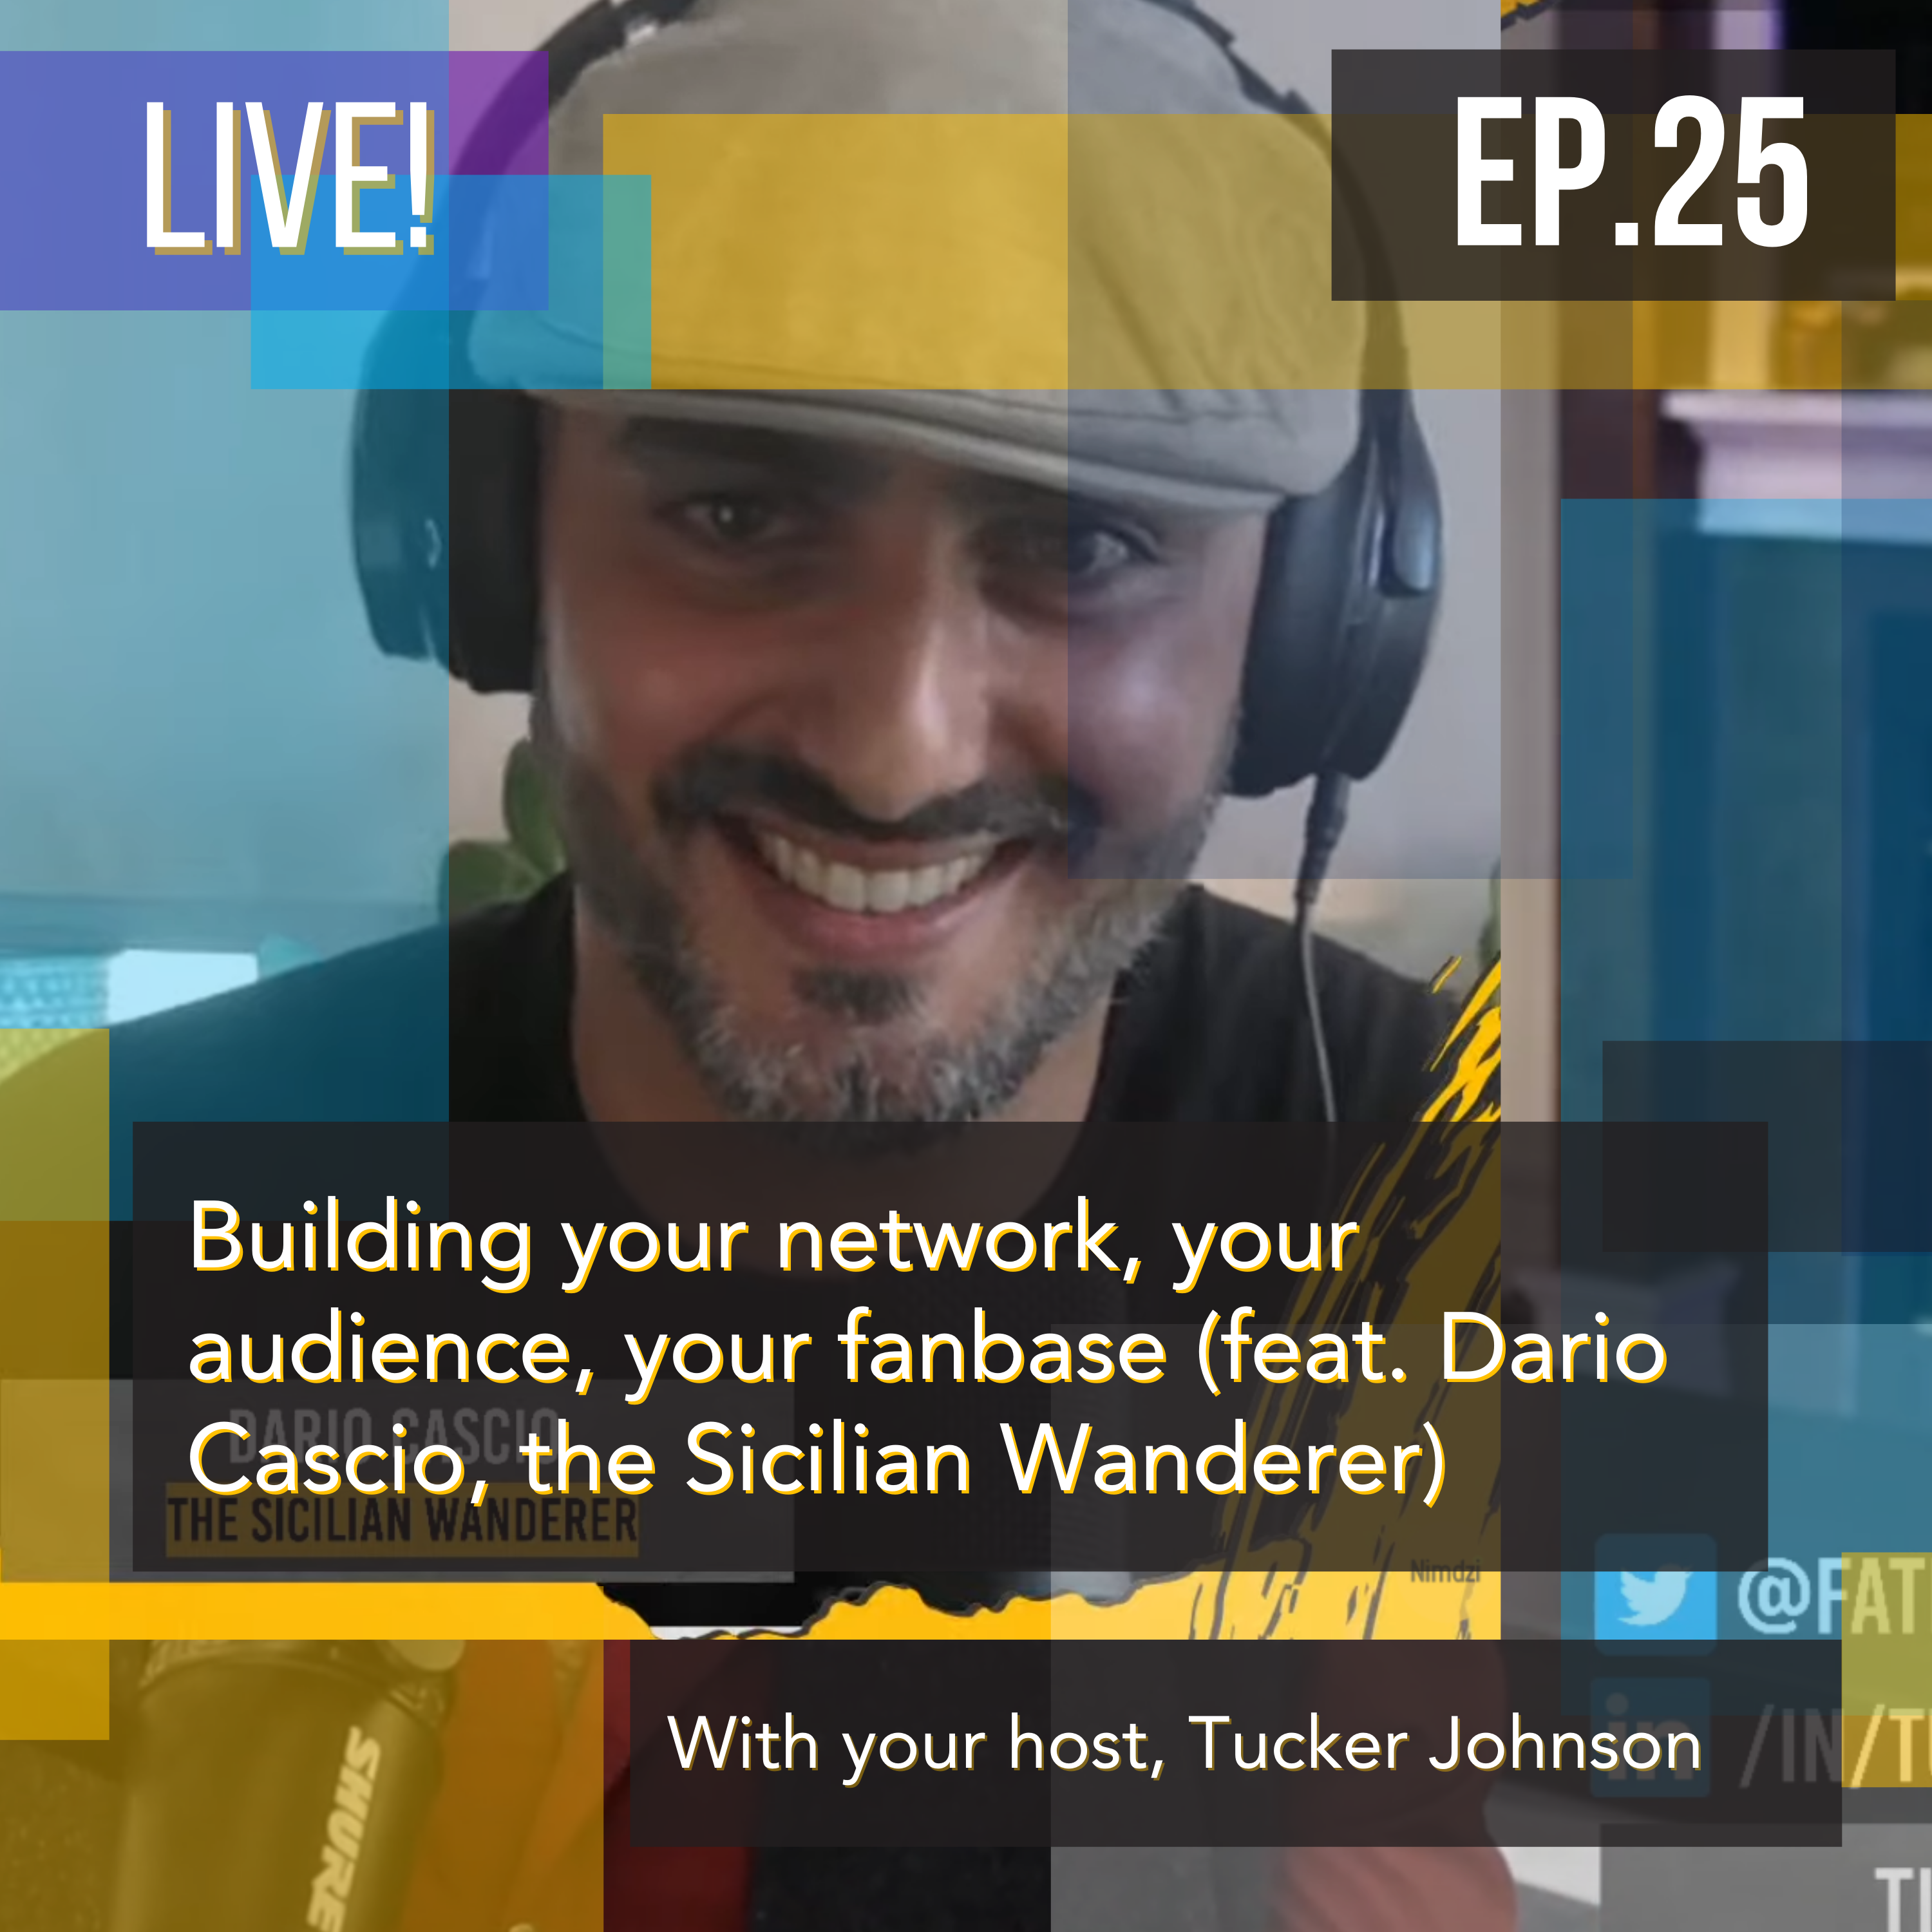 Building your network, your audience, your fanbase (feat. the Sicilian Wanderer)